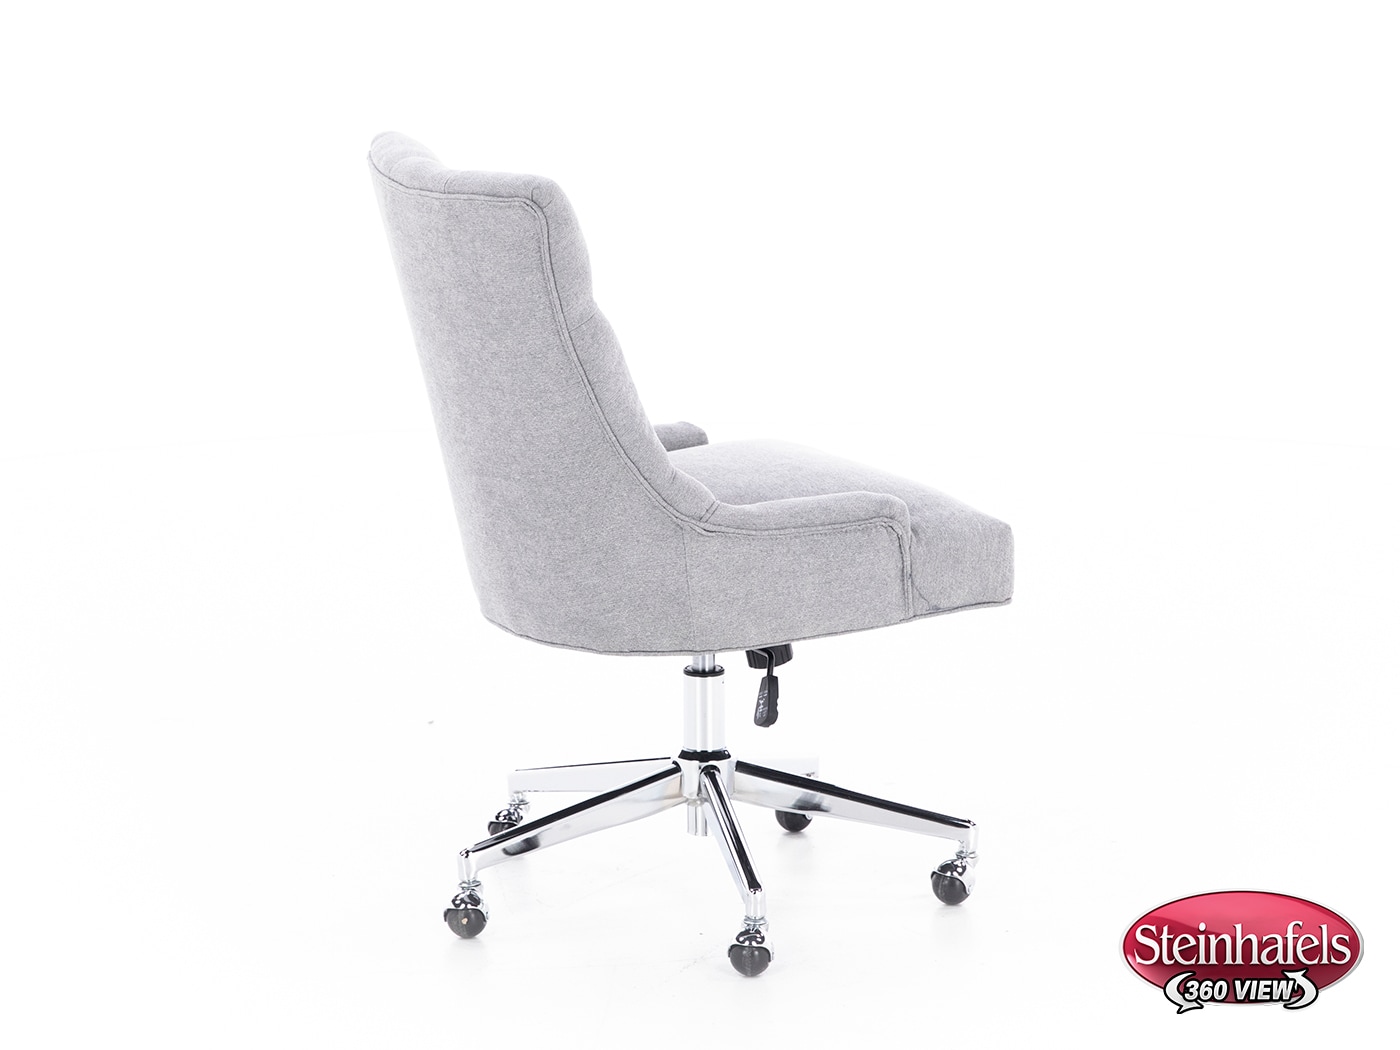 ofst grey desk chair  image cha  